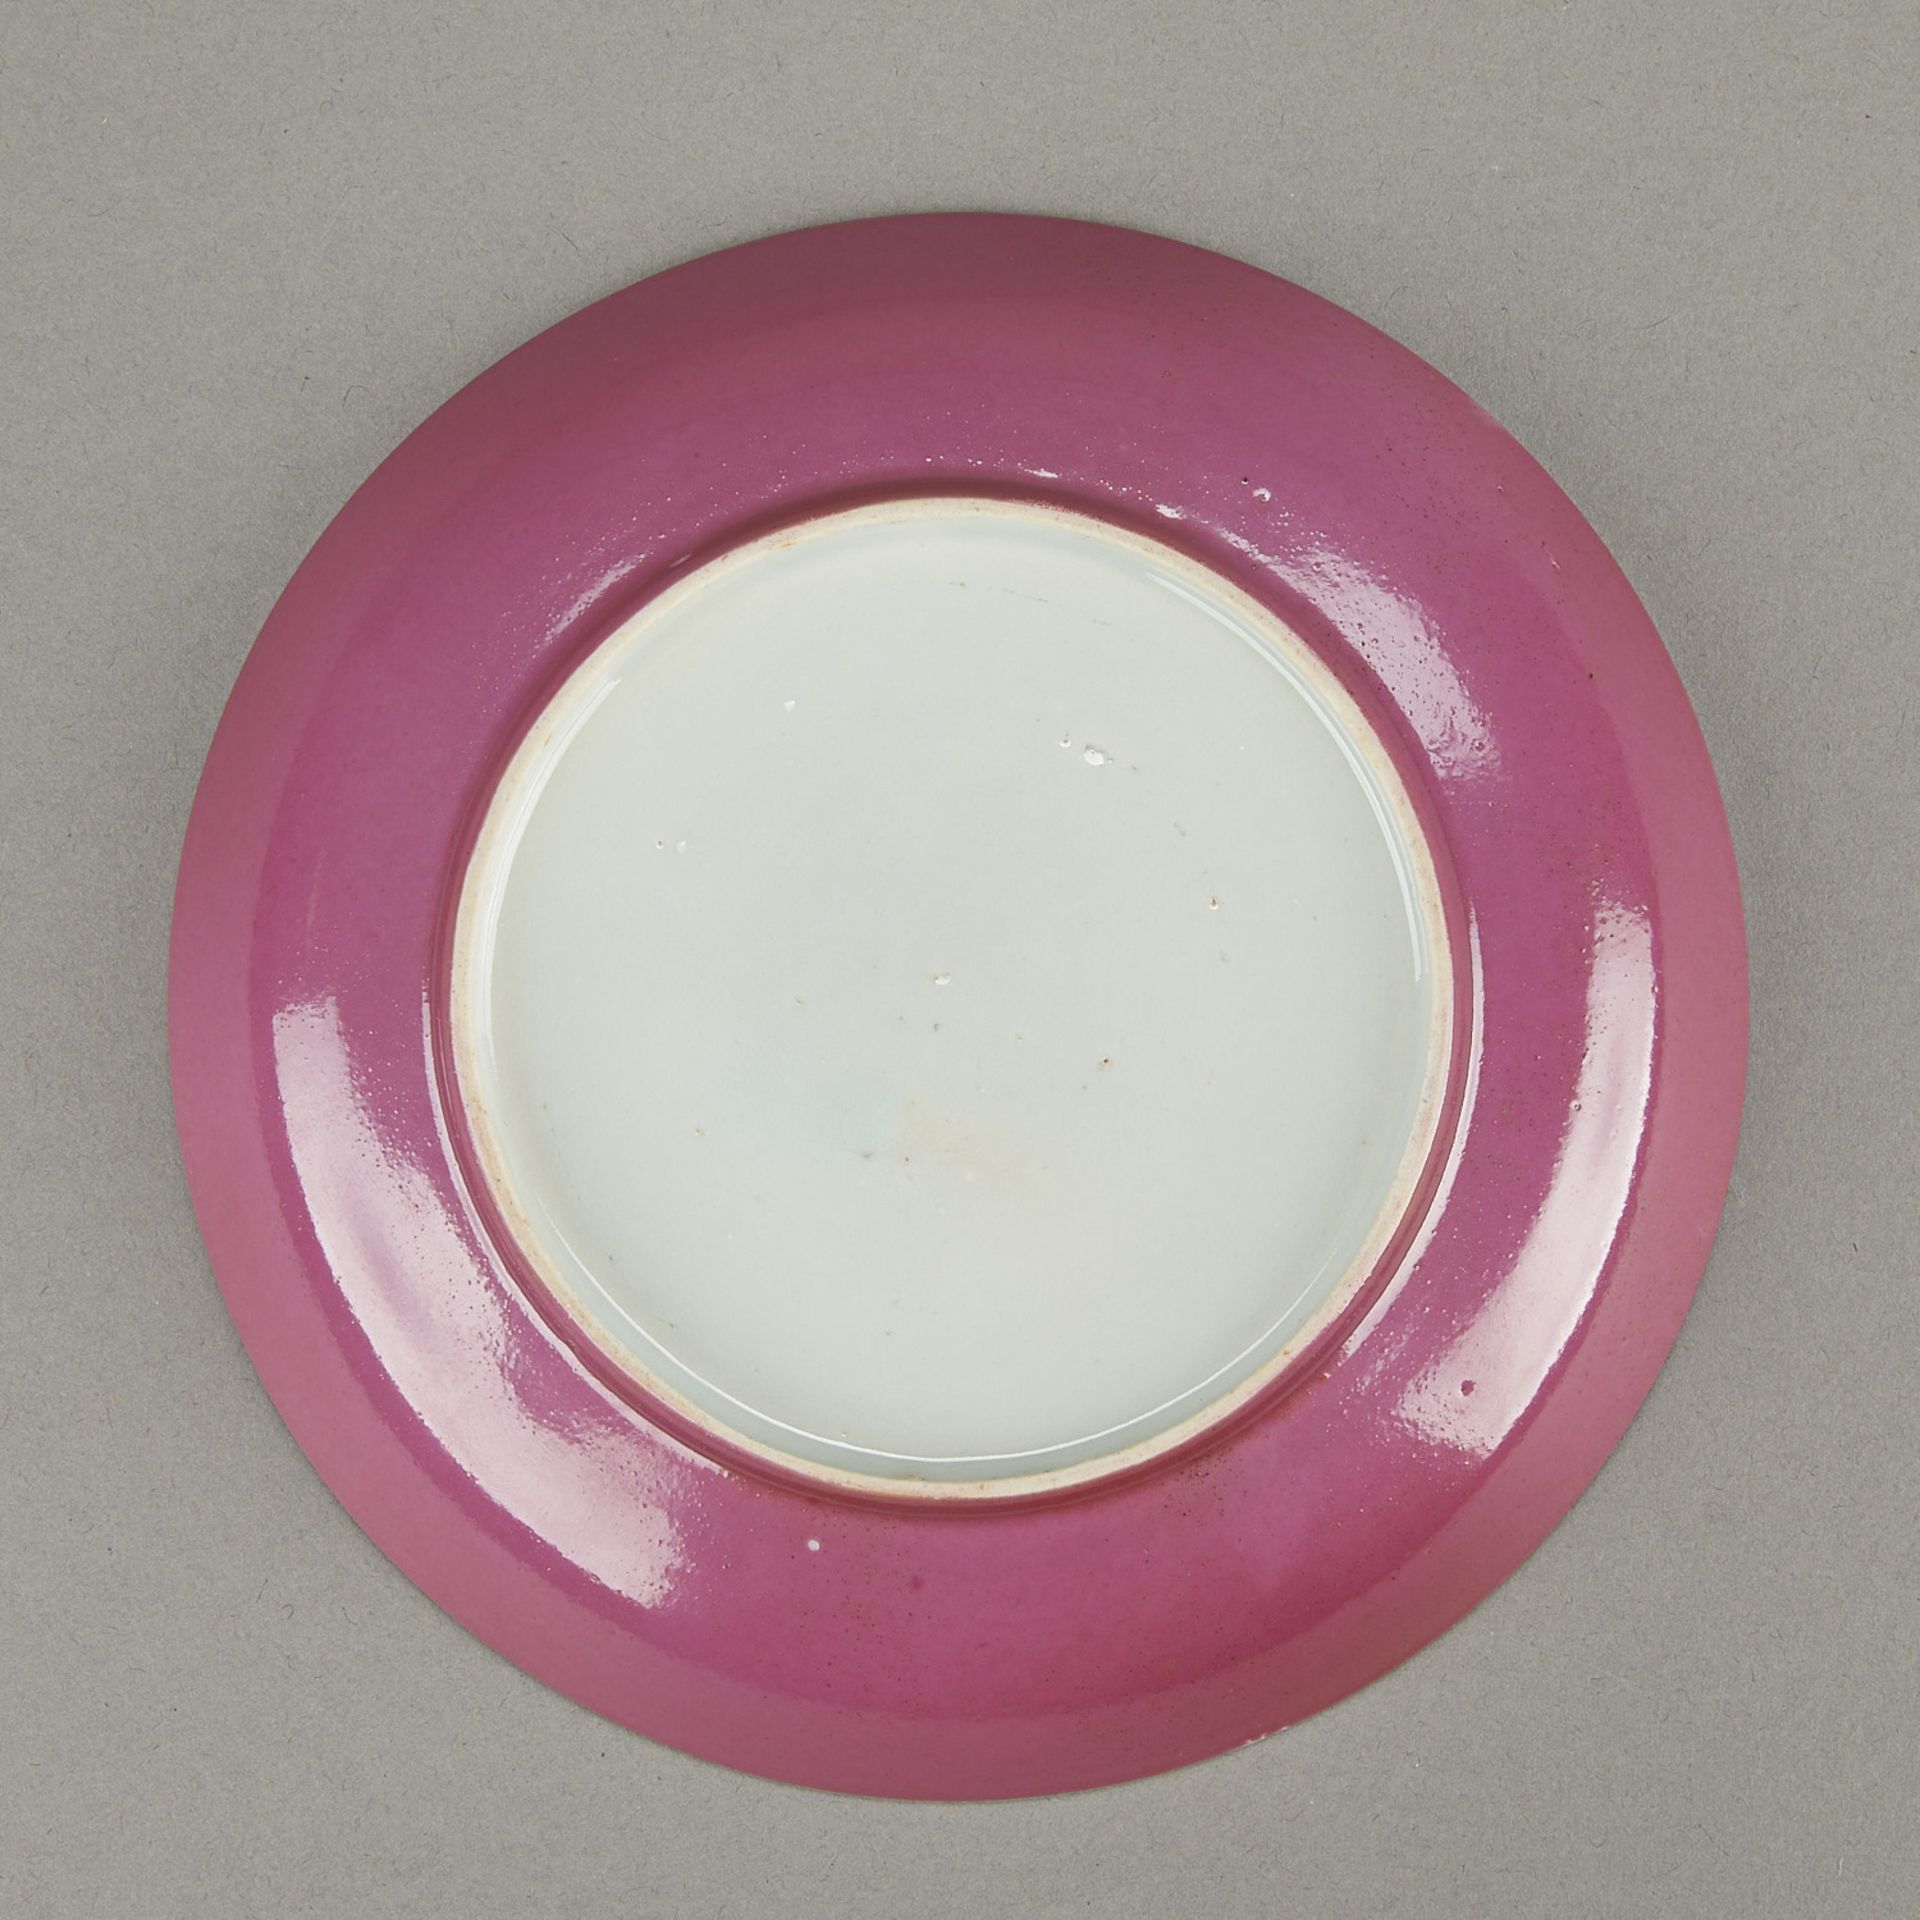 20th c. Chinese Porcelain Oxblood Plate - Image 2 of 5